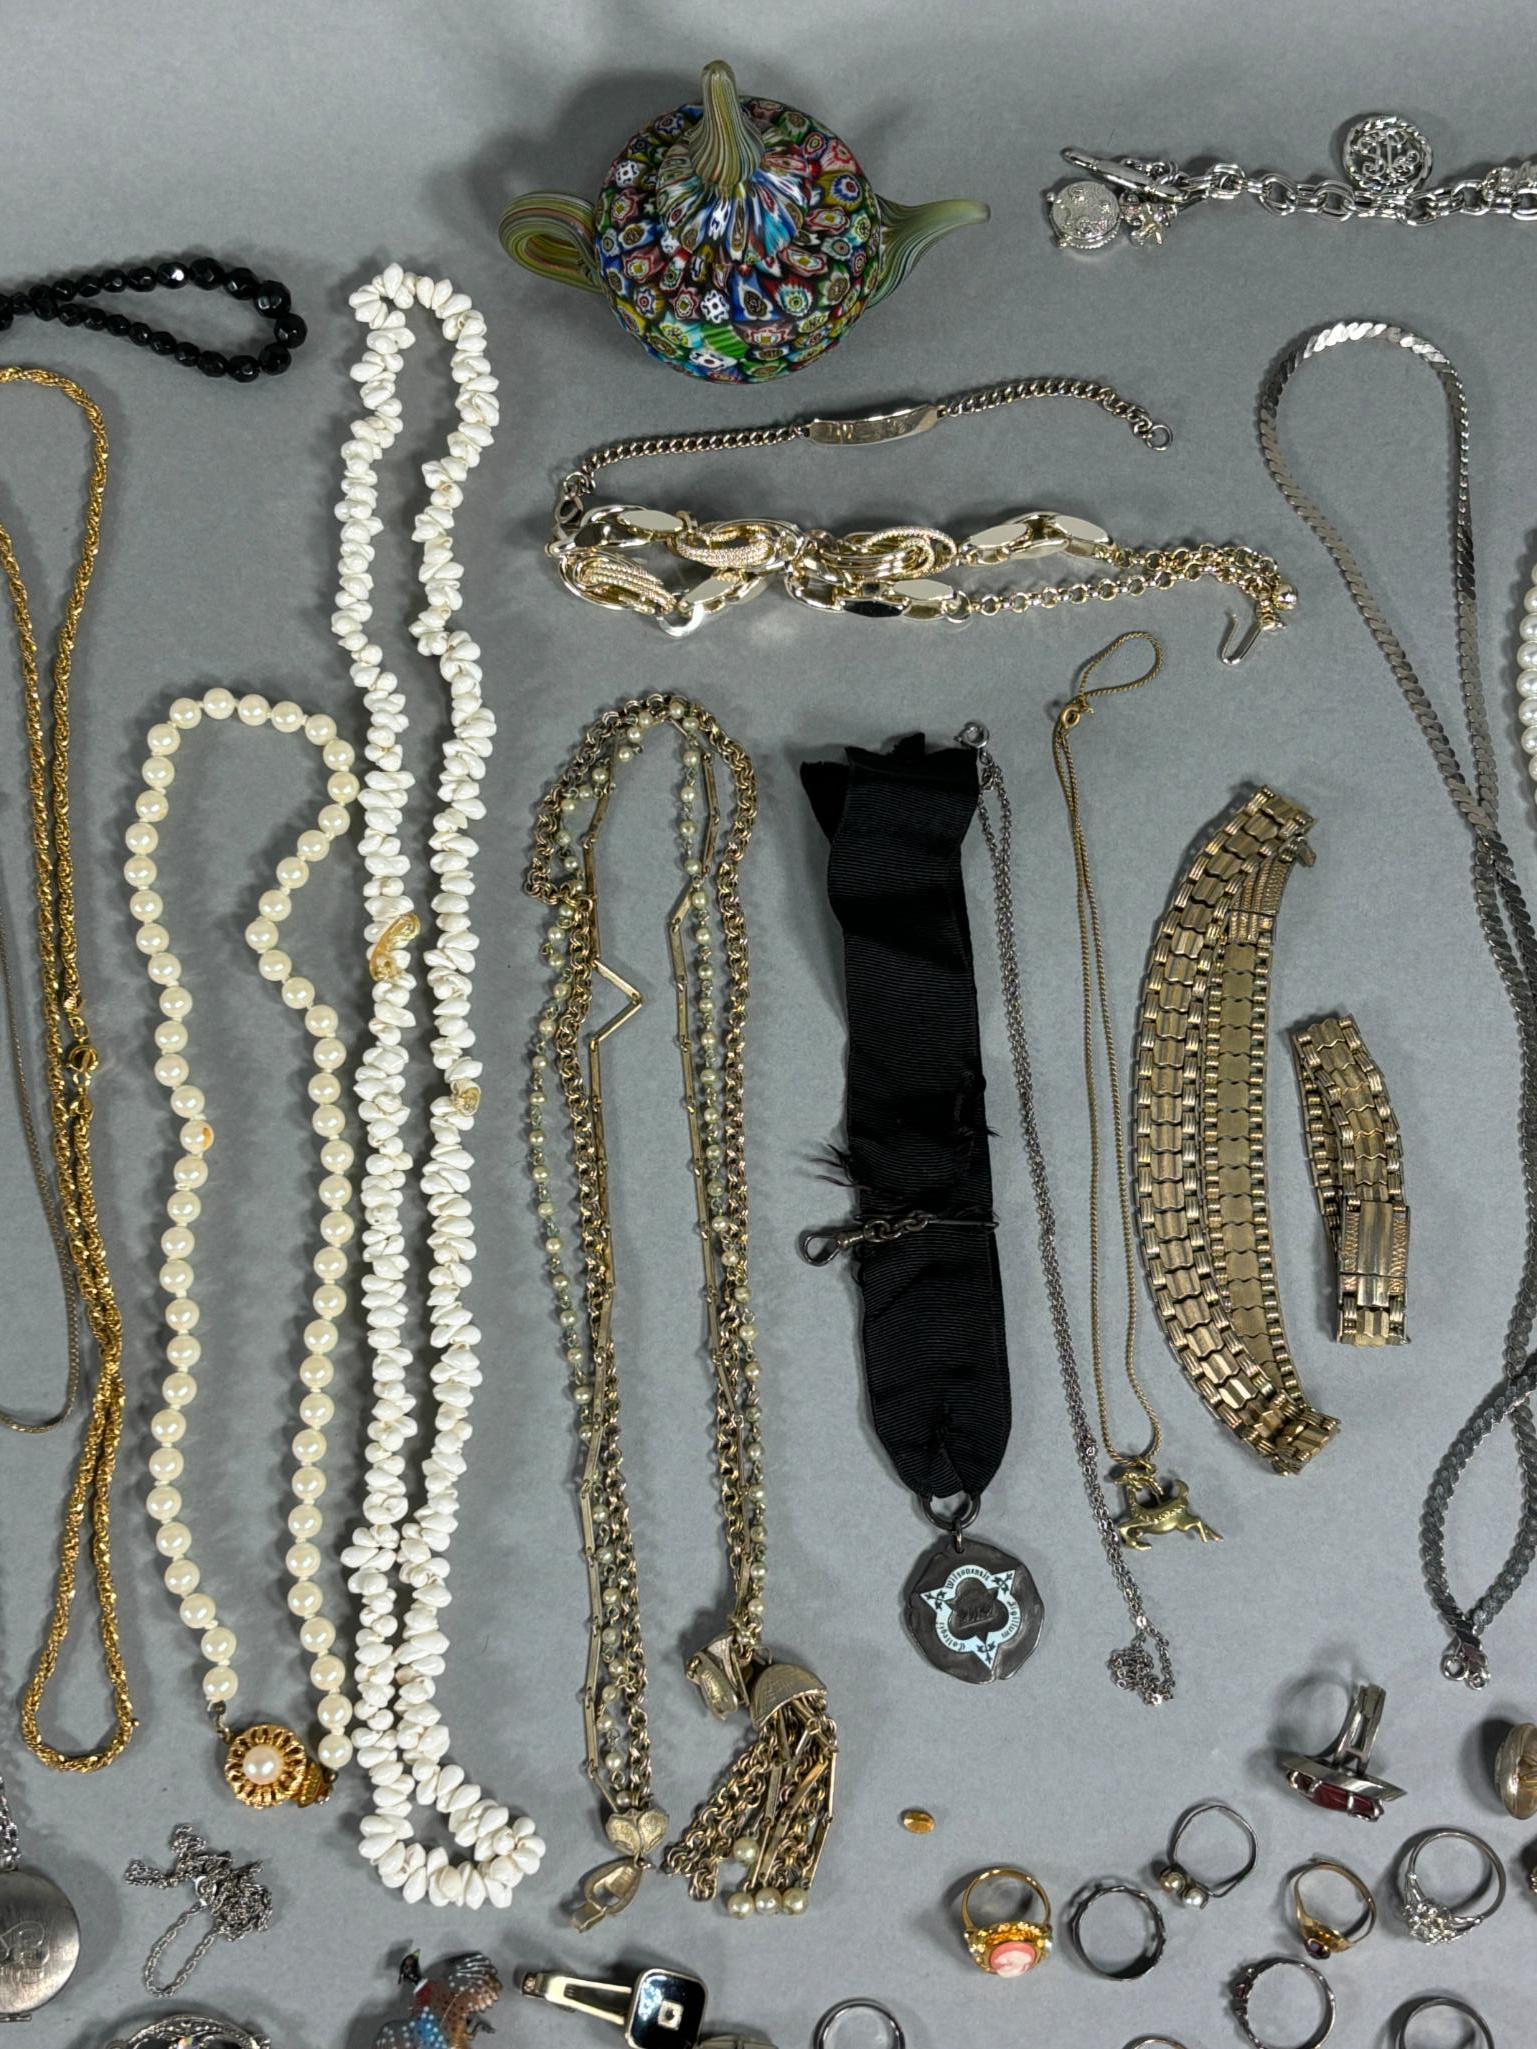 Large Group Lot Vintage Costume Jewelry